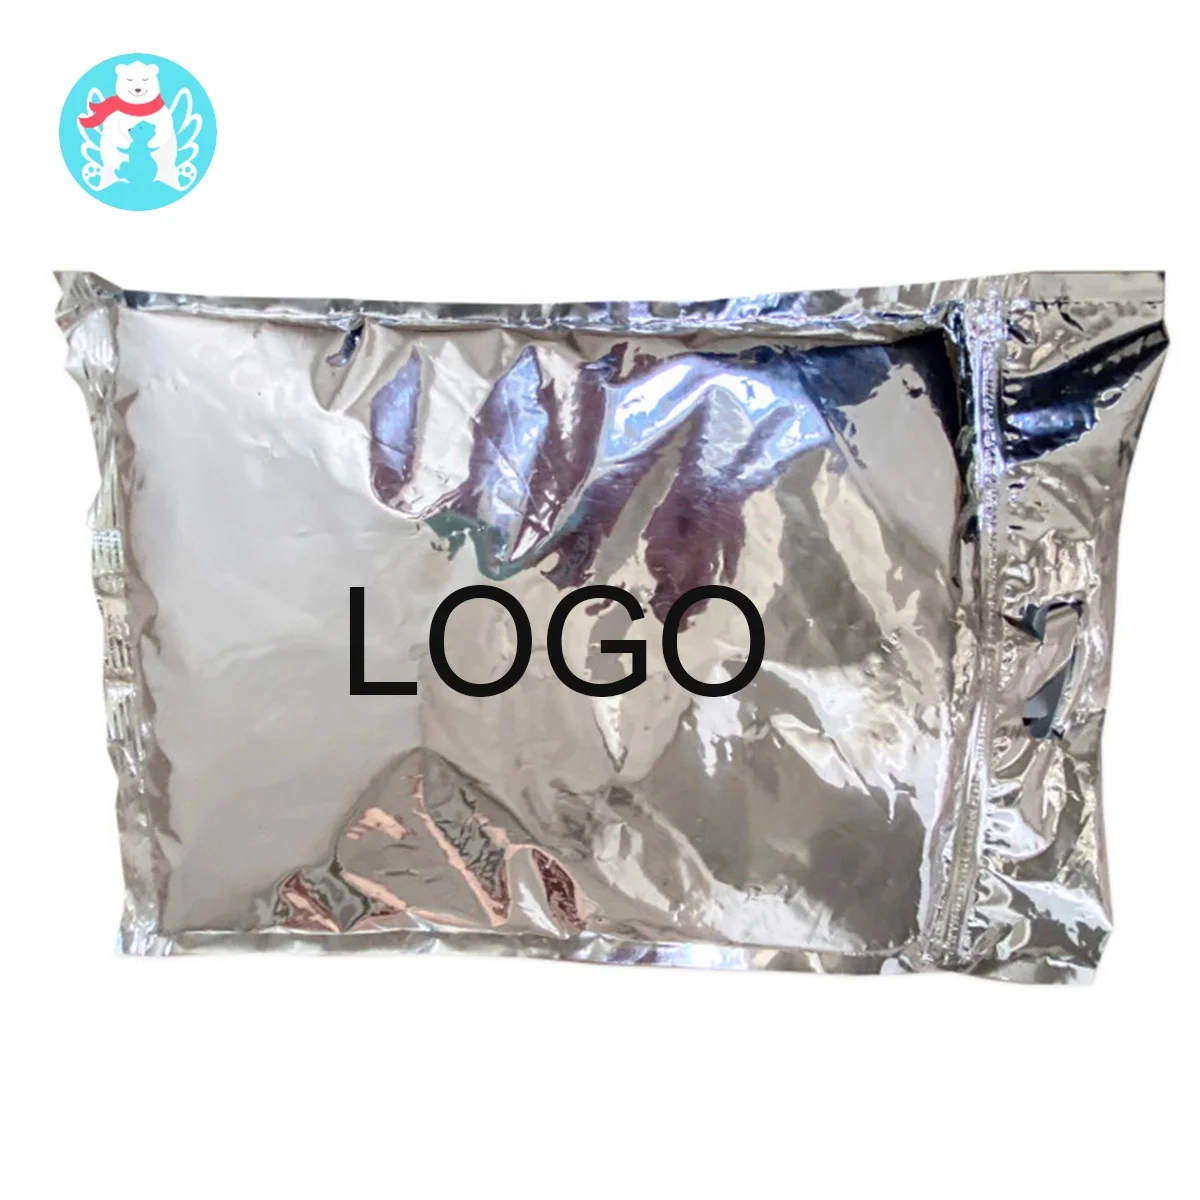 Portable ziplock silver aluminum foil package thermal insulated cooler bag for food